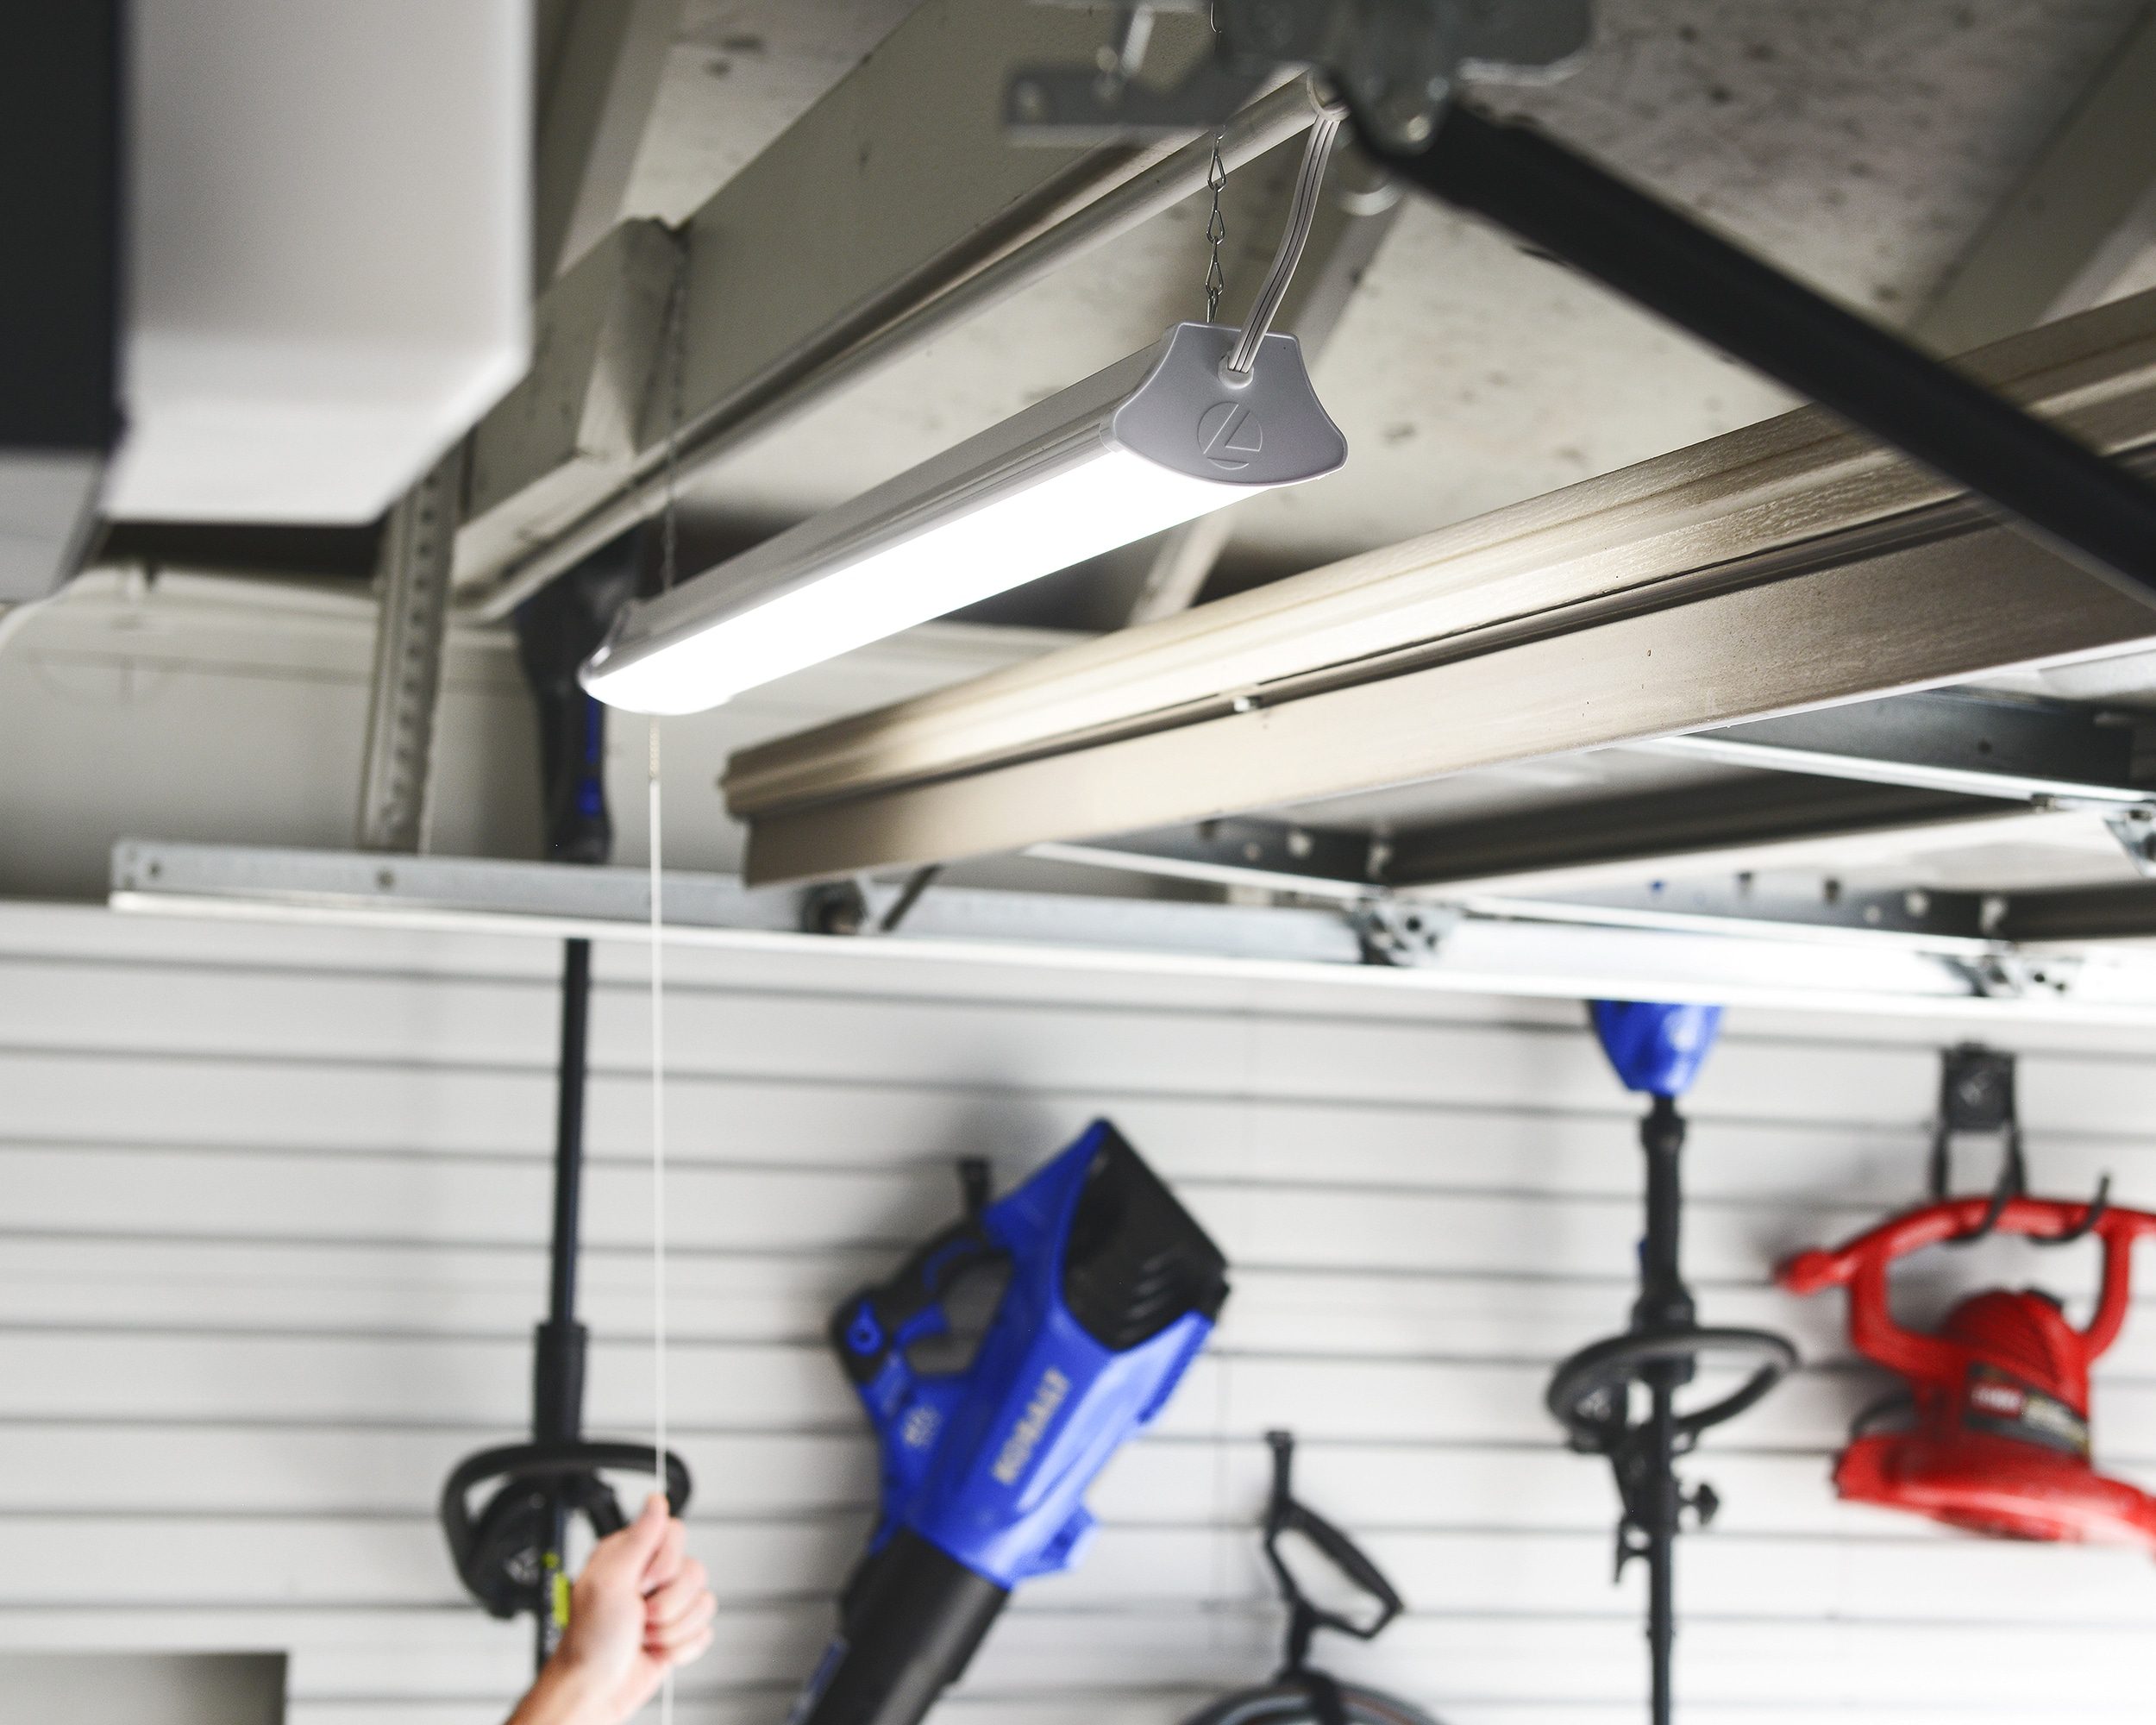 7 Garage Organization Tips Before Winter Hits! via Yellow Brick Home with Lowe's Home Improvement #lowespartner